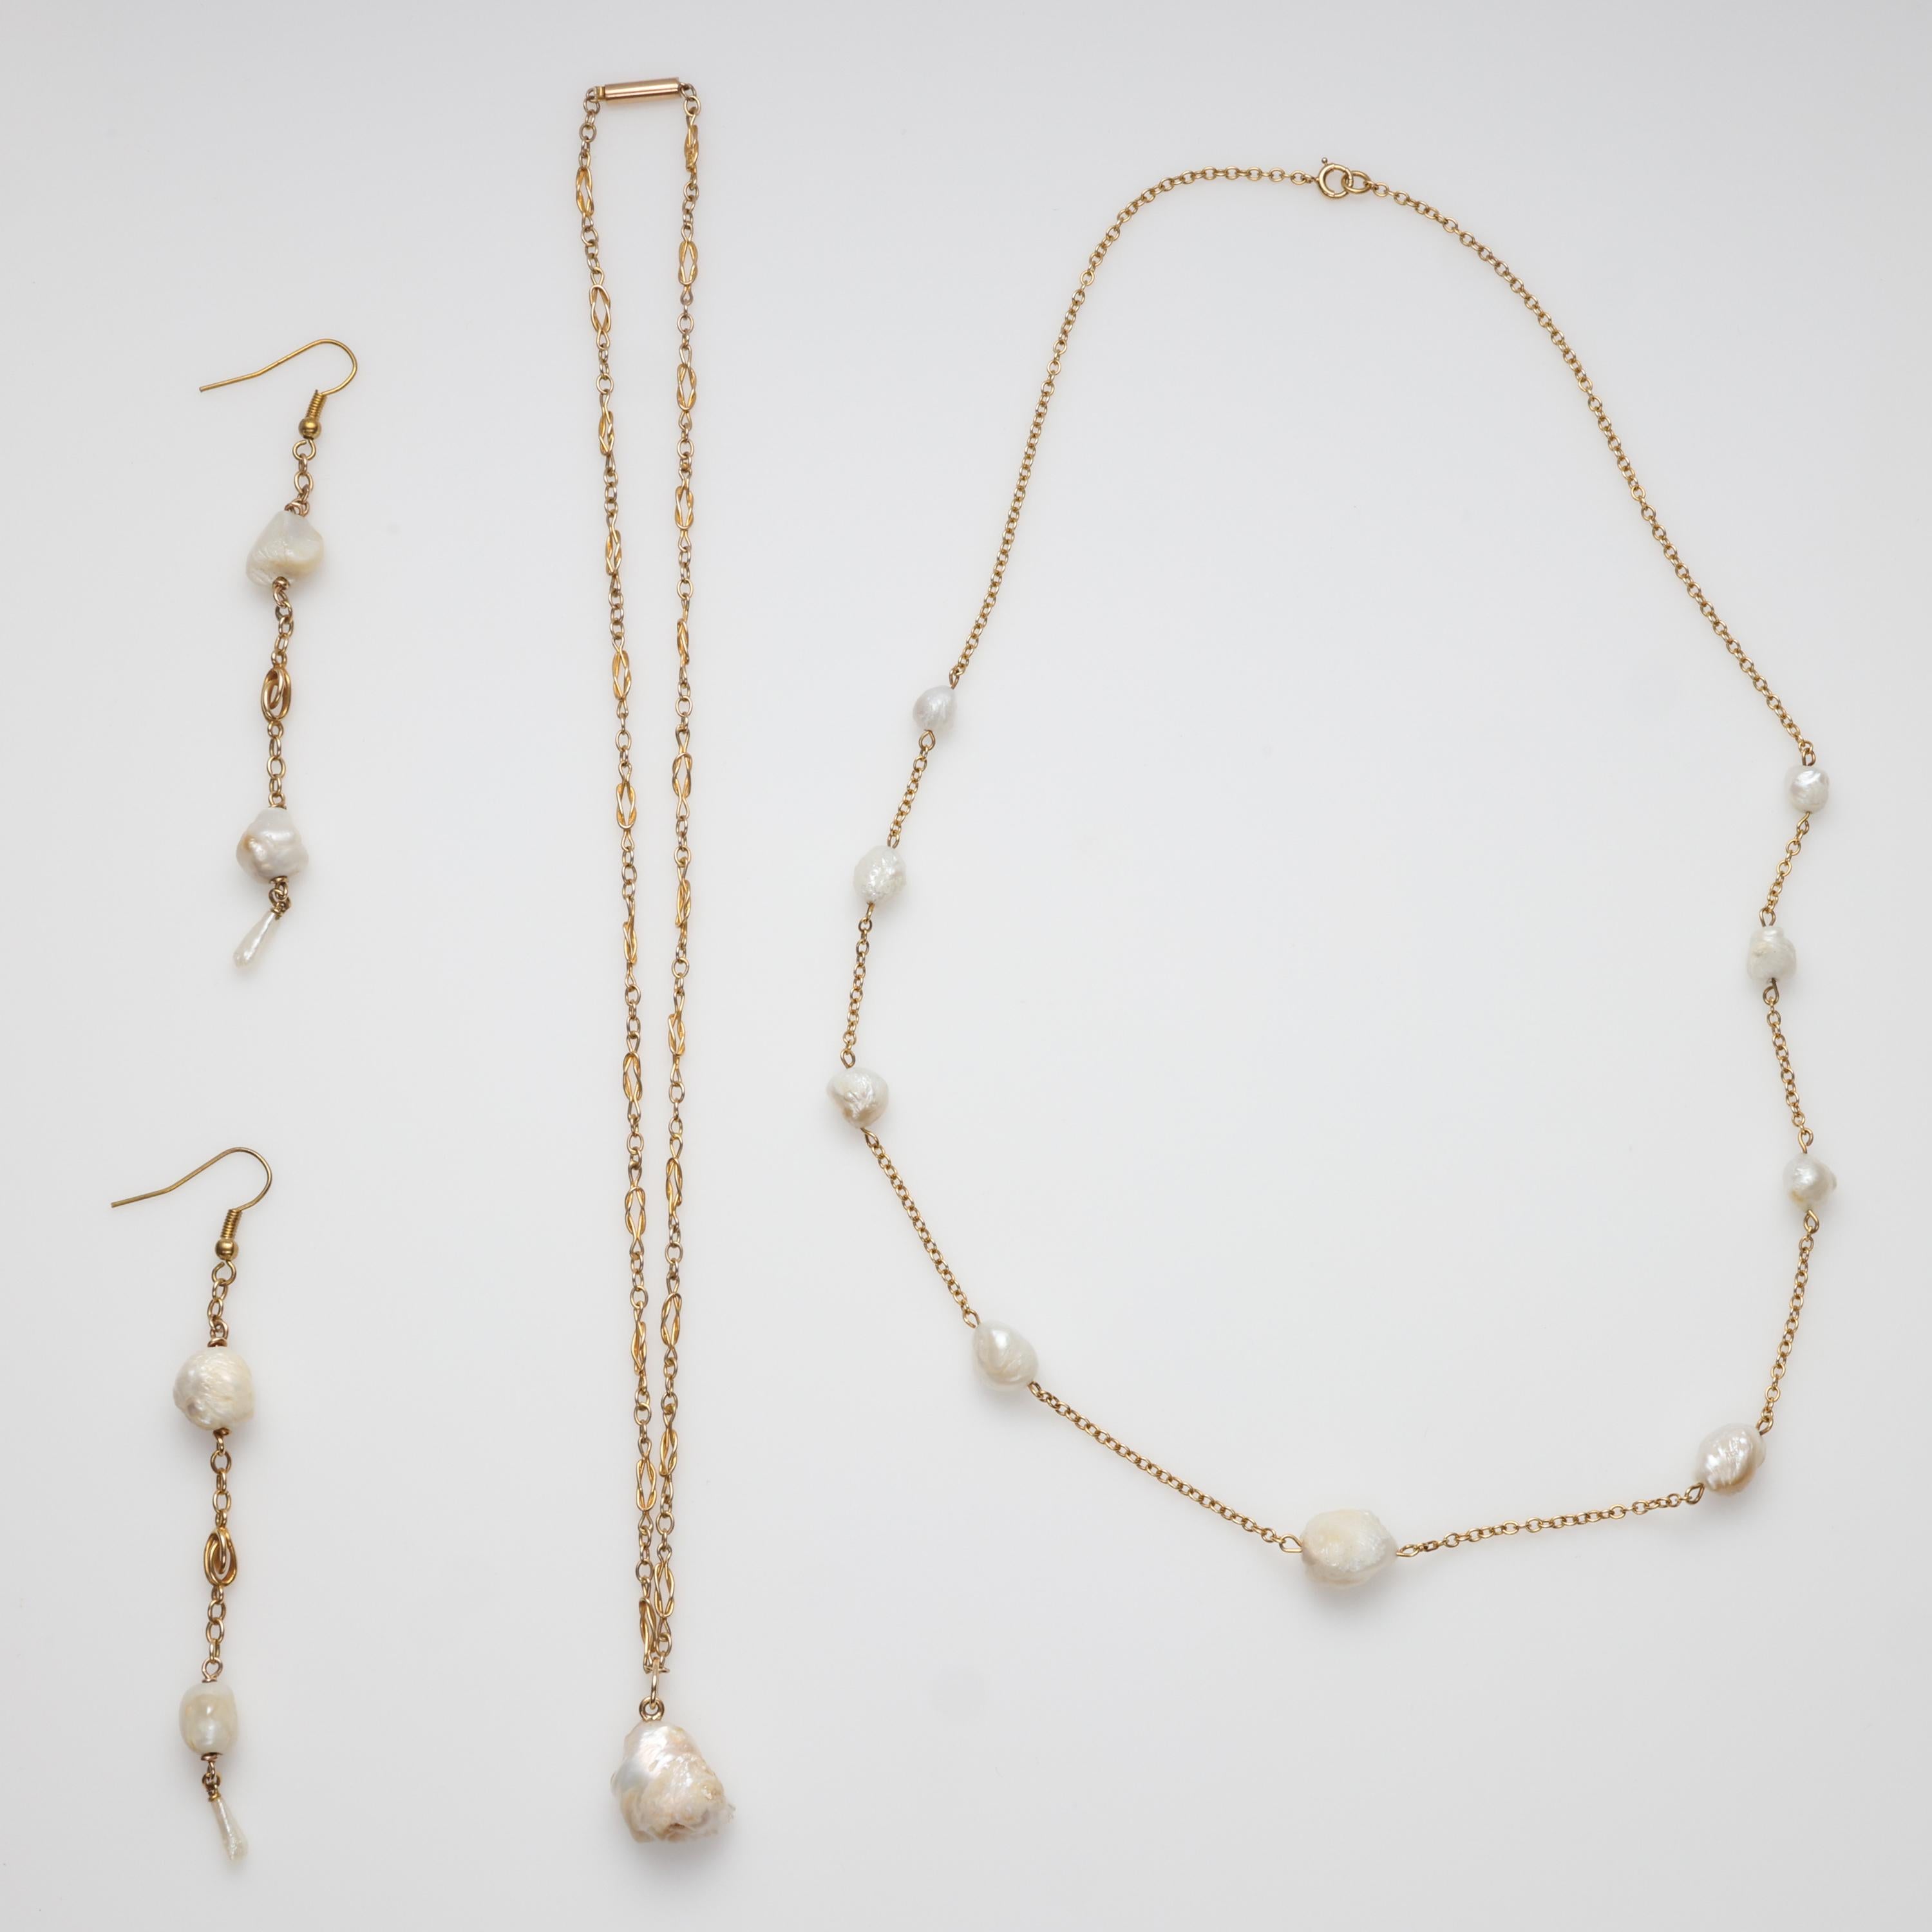 Artisan GIA Certified Natural Pearl Necklace, Pendant, Earring Set Parure For Sale